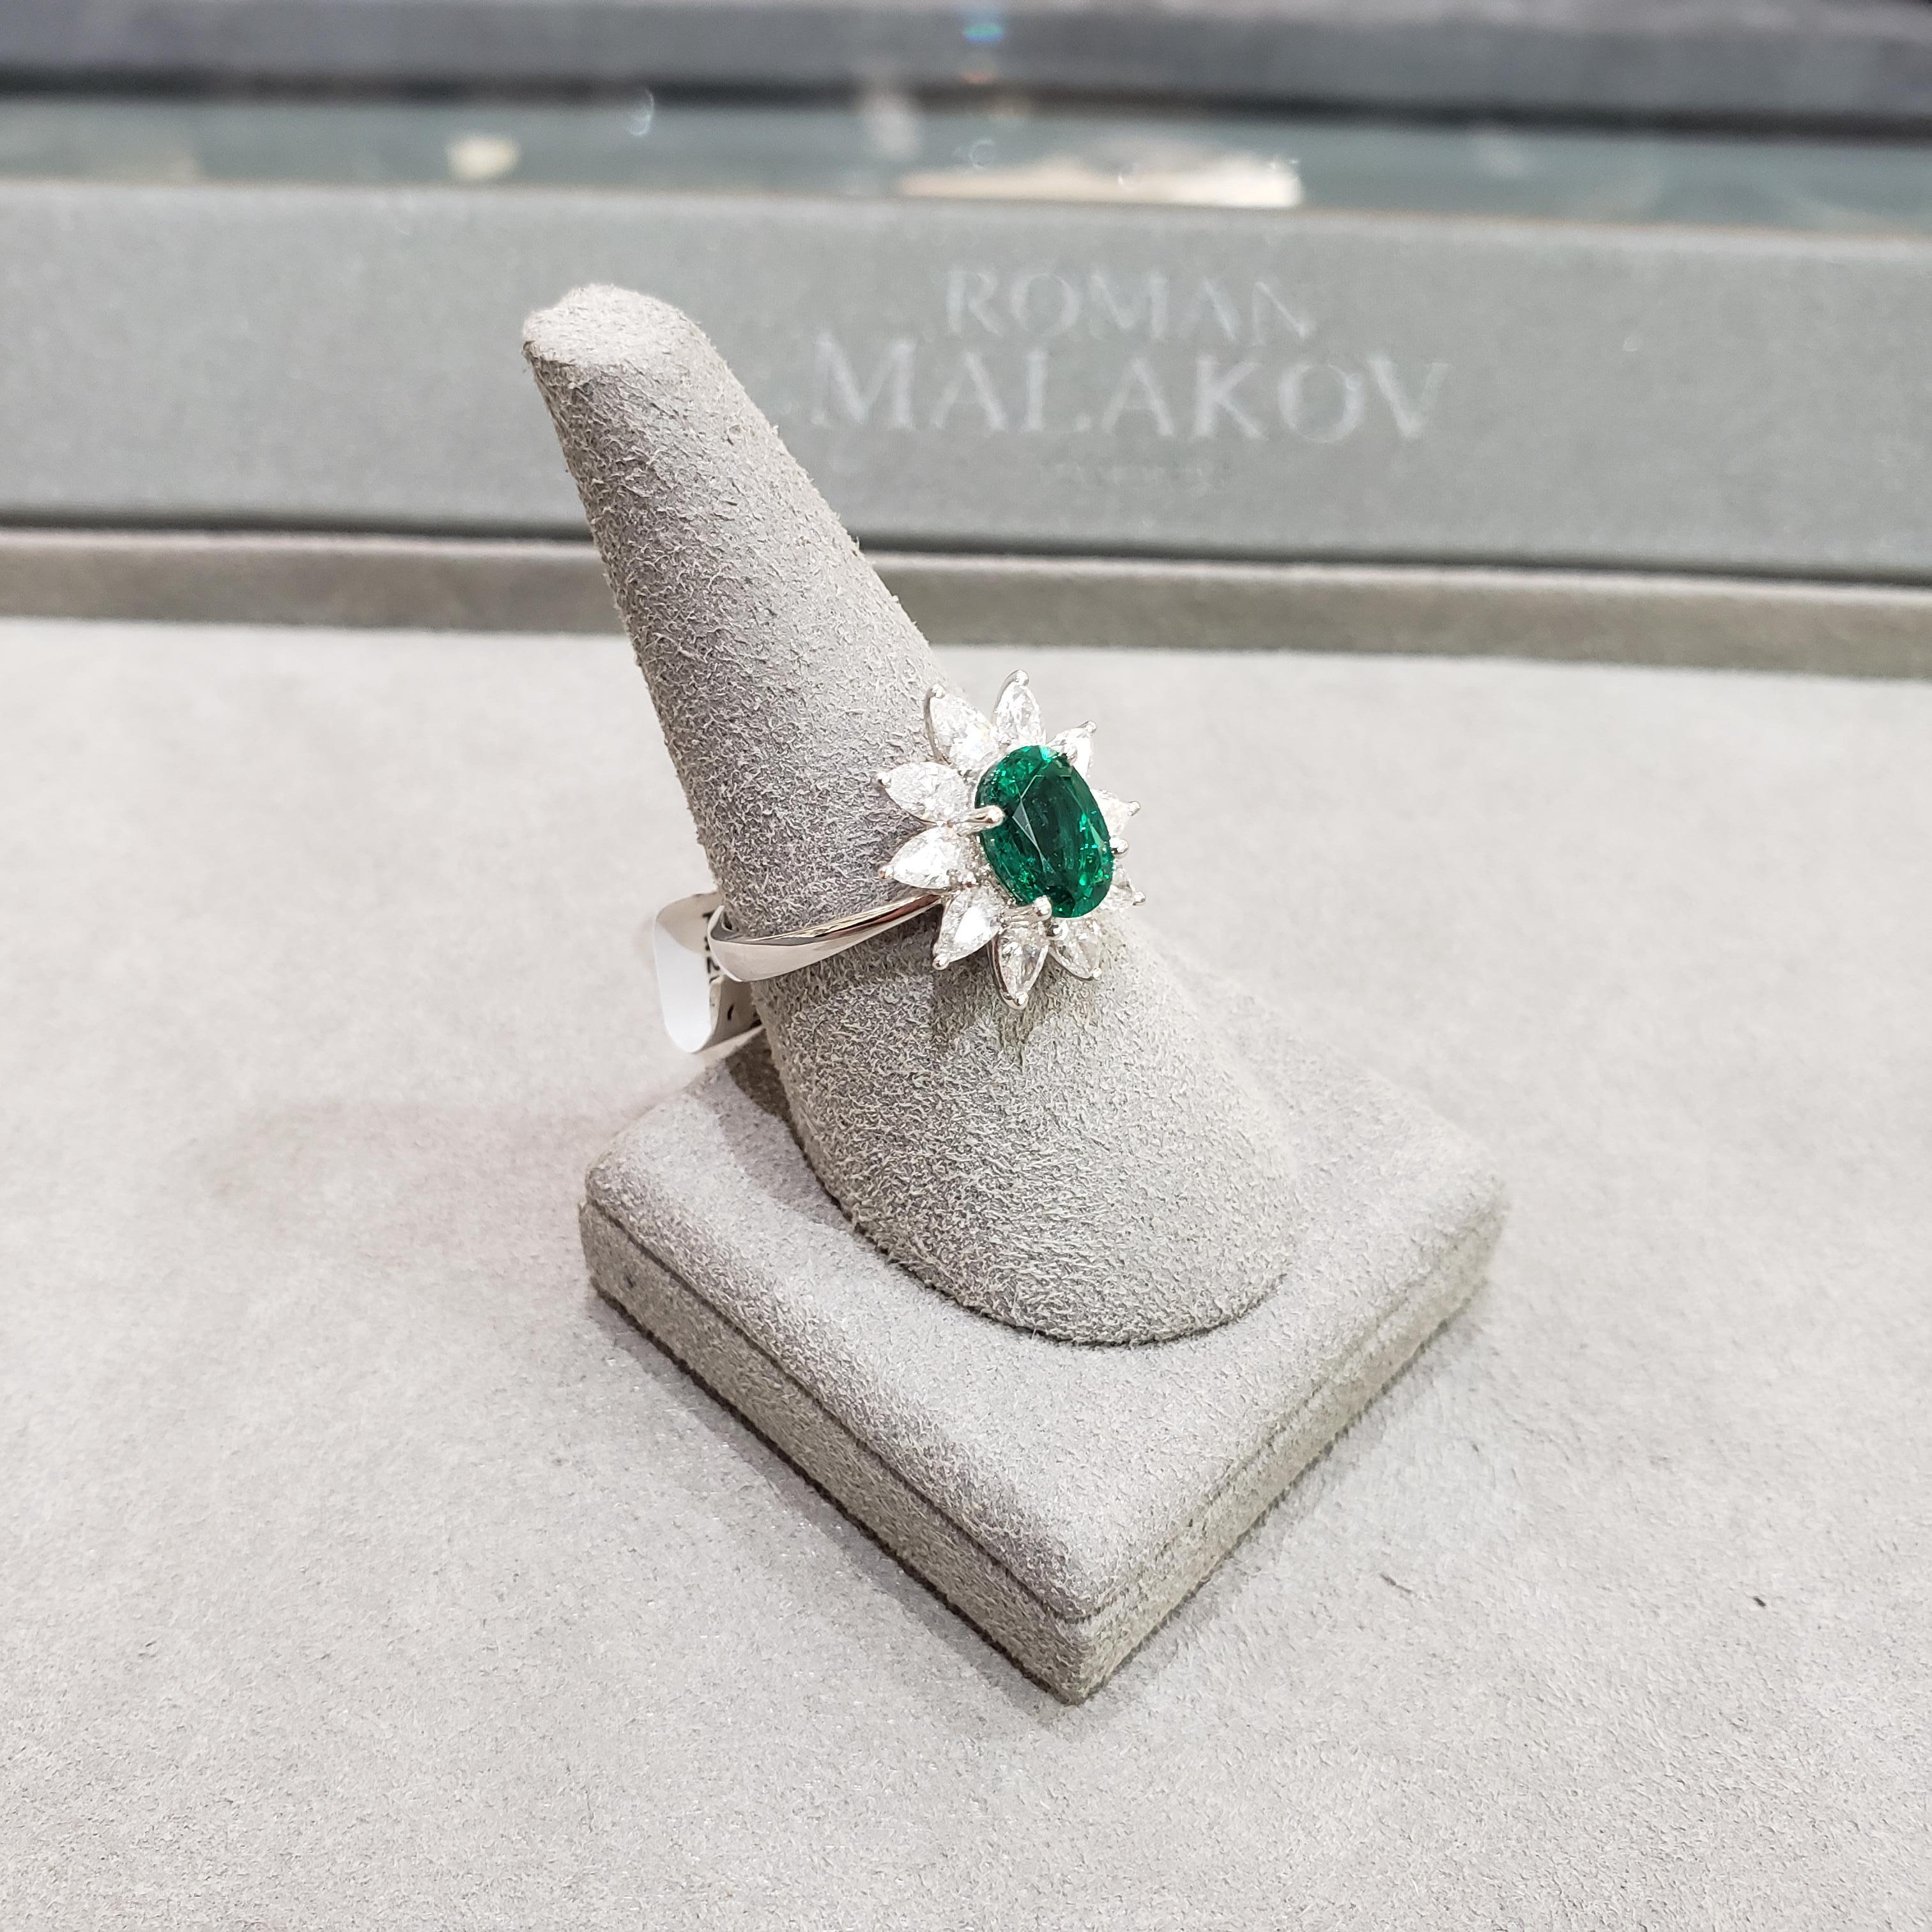 Contemporary Roman Malakov 1.48 Carats Oval Cut Green Emerald with Diamond Halo Floral Ring  For Sale